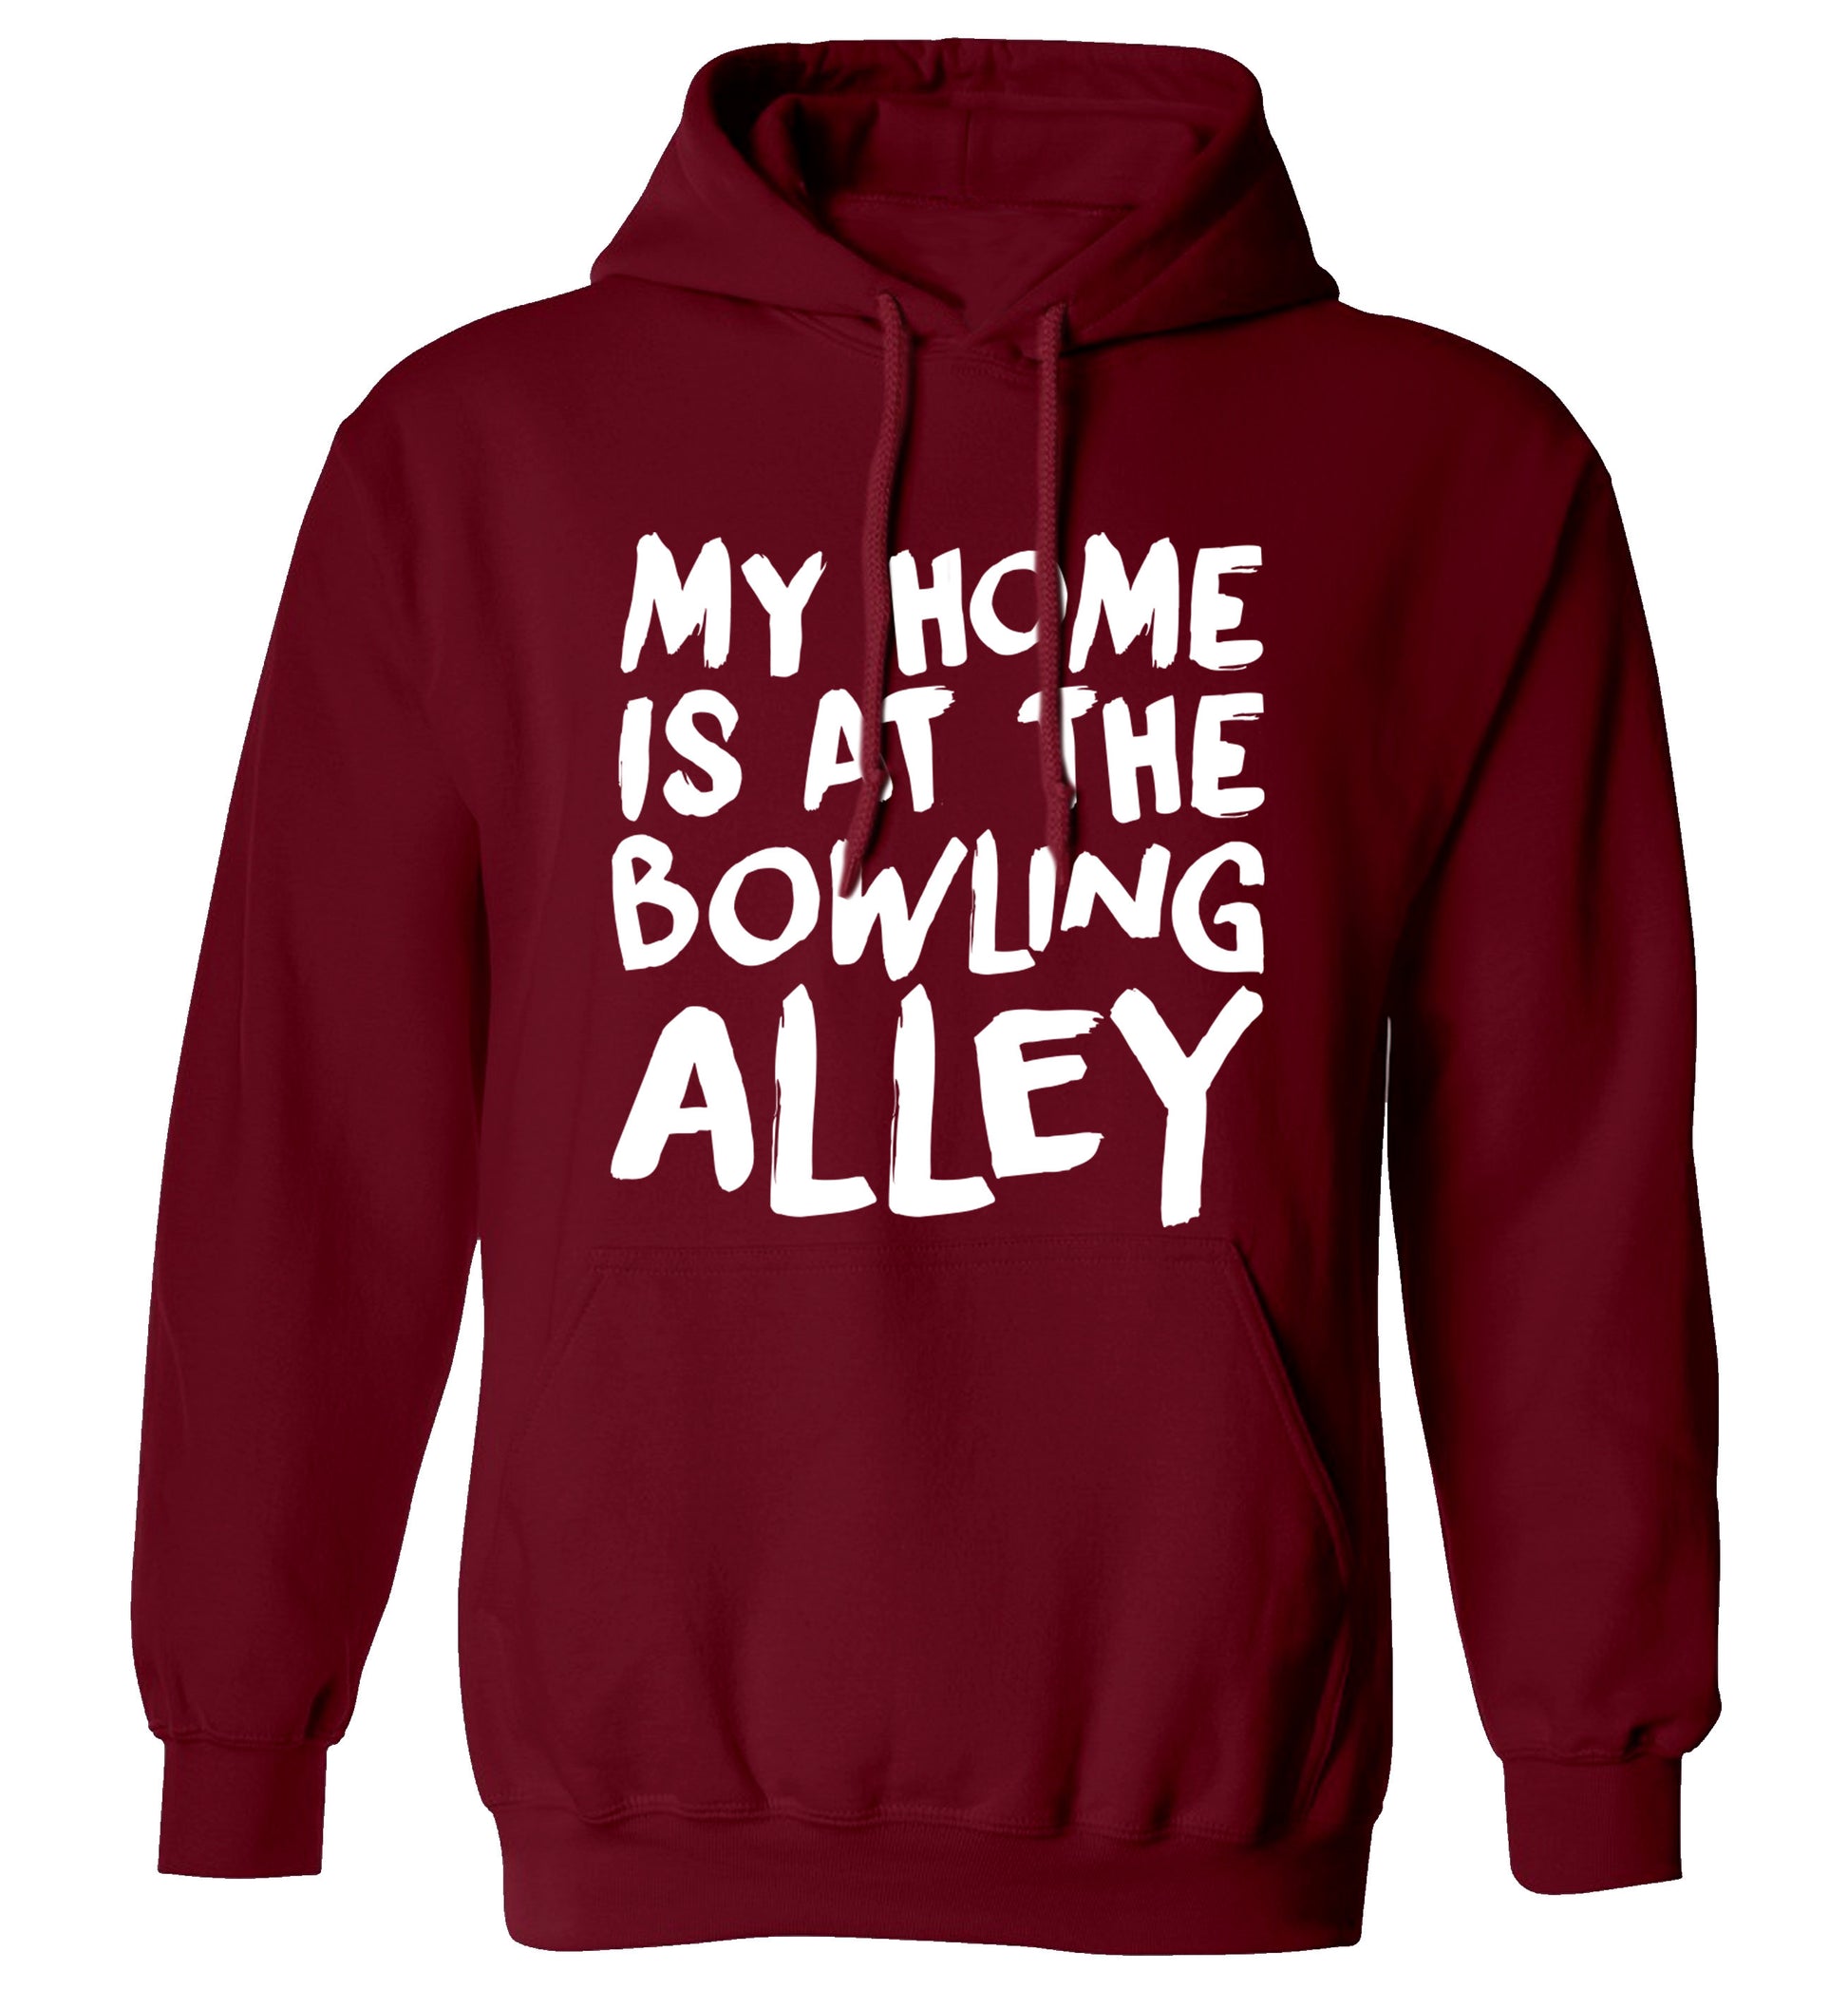 My home is at the bowling alley adults unisex maroon hoodie 2XL